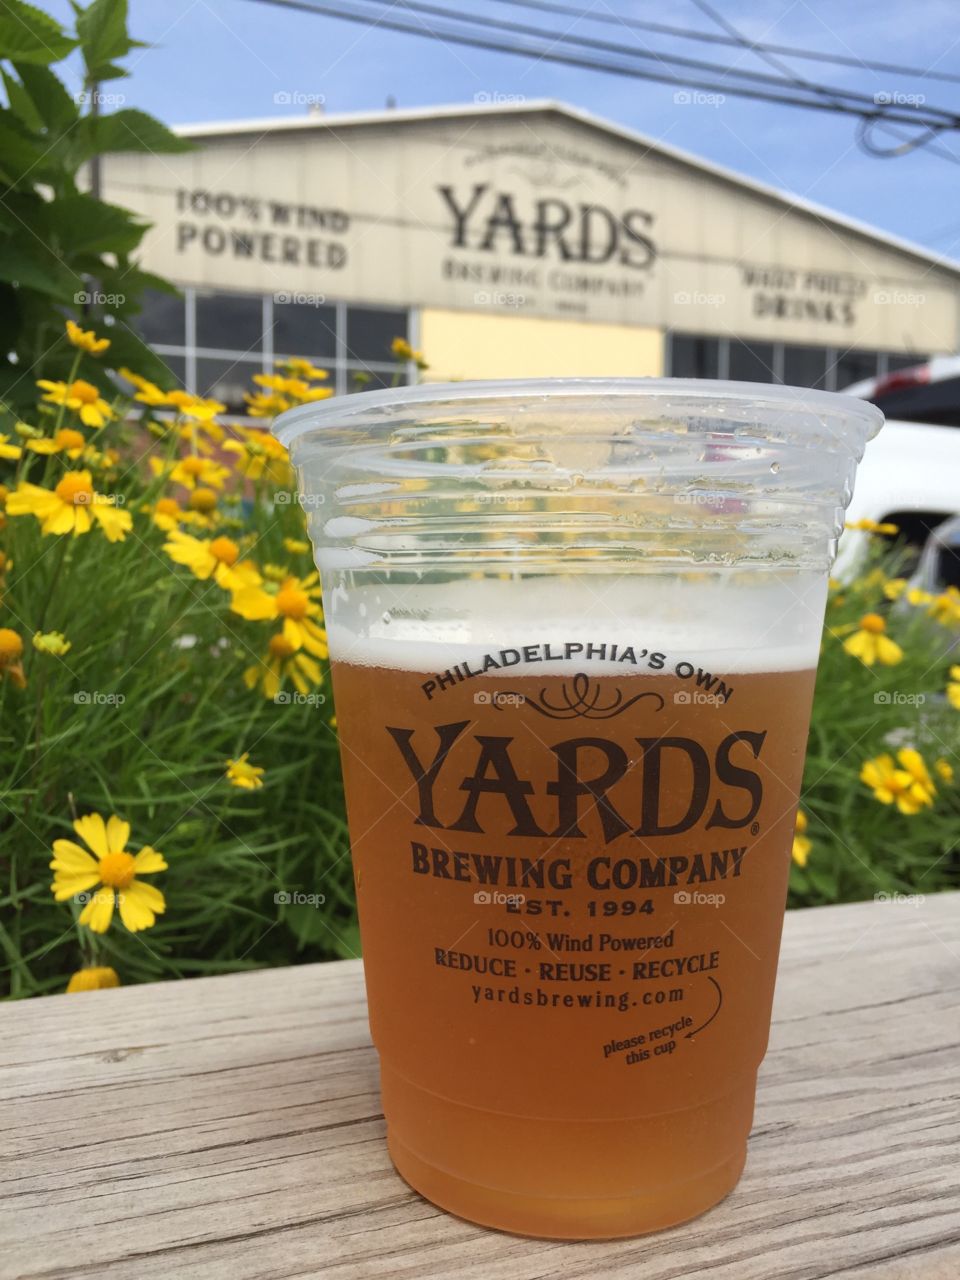 A delicious beer from Yard's Brewing Company, Philadelphia